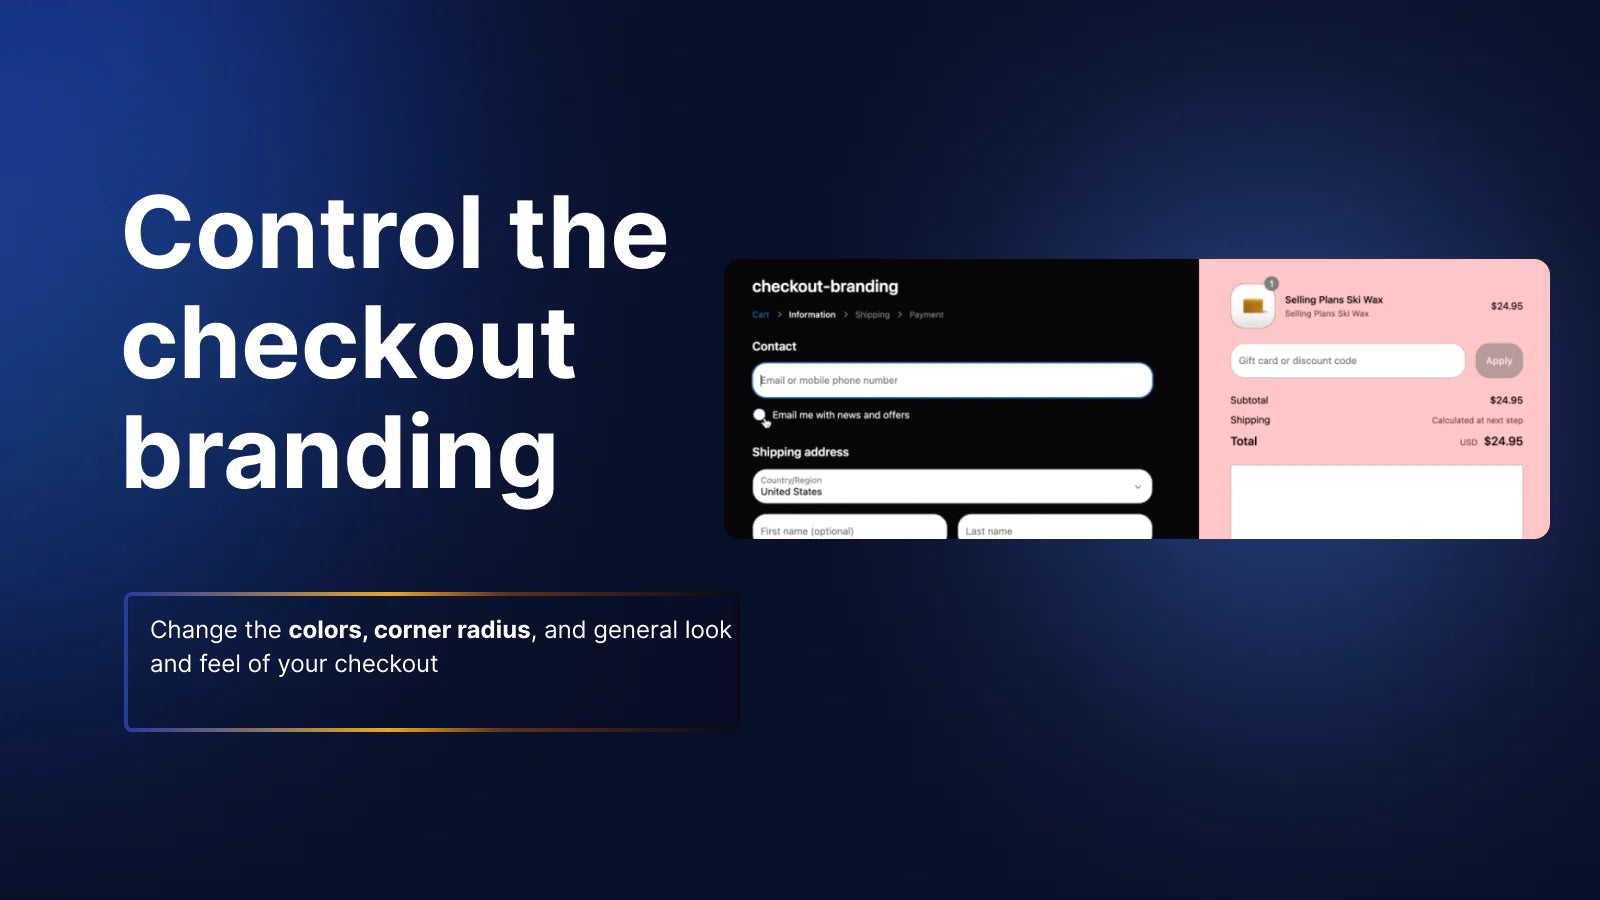 the image shows that you can control the checkout branding